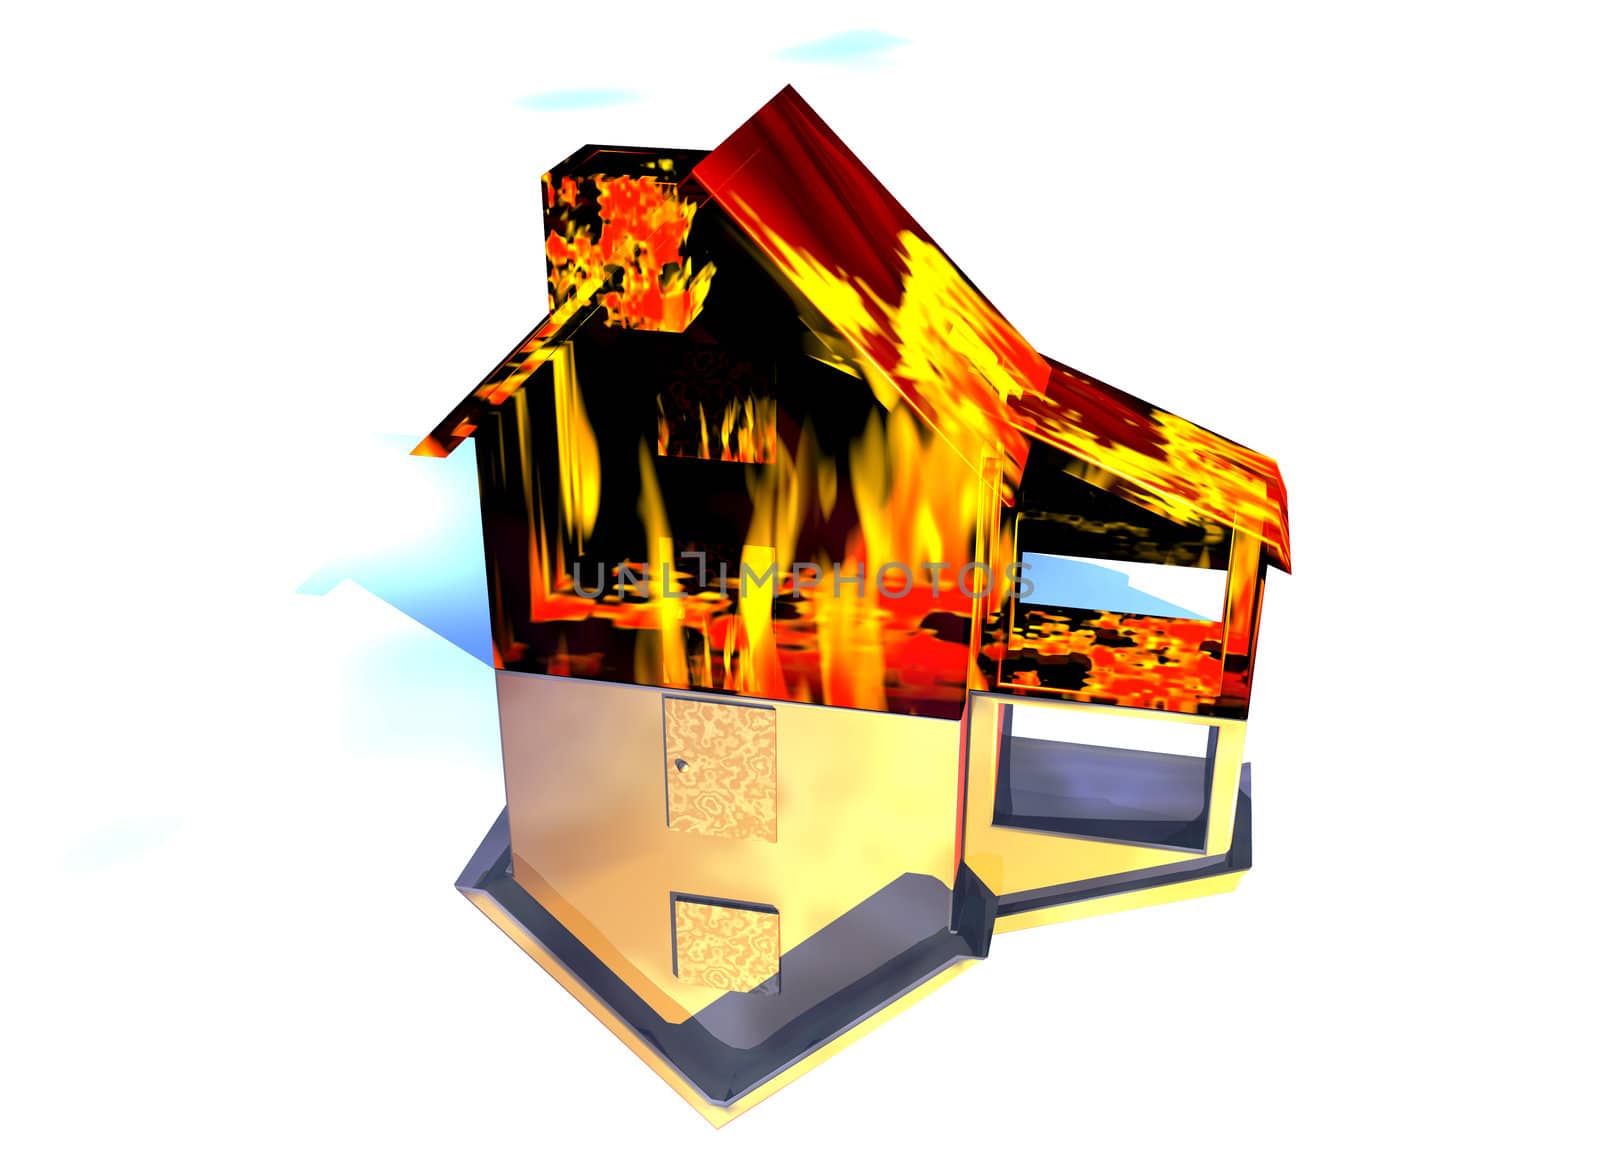 Red Home on Fire House Model with Reflection Concept For Risk or Property Insurance Protection on White Background